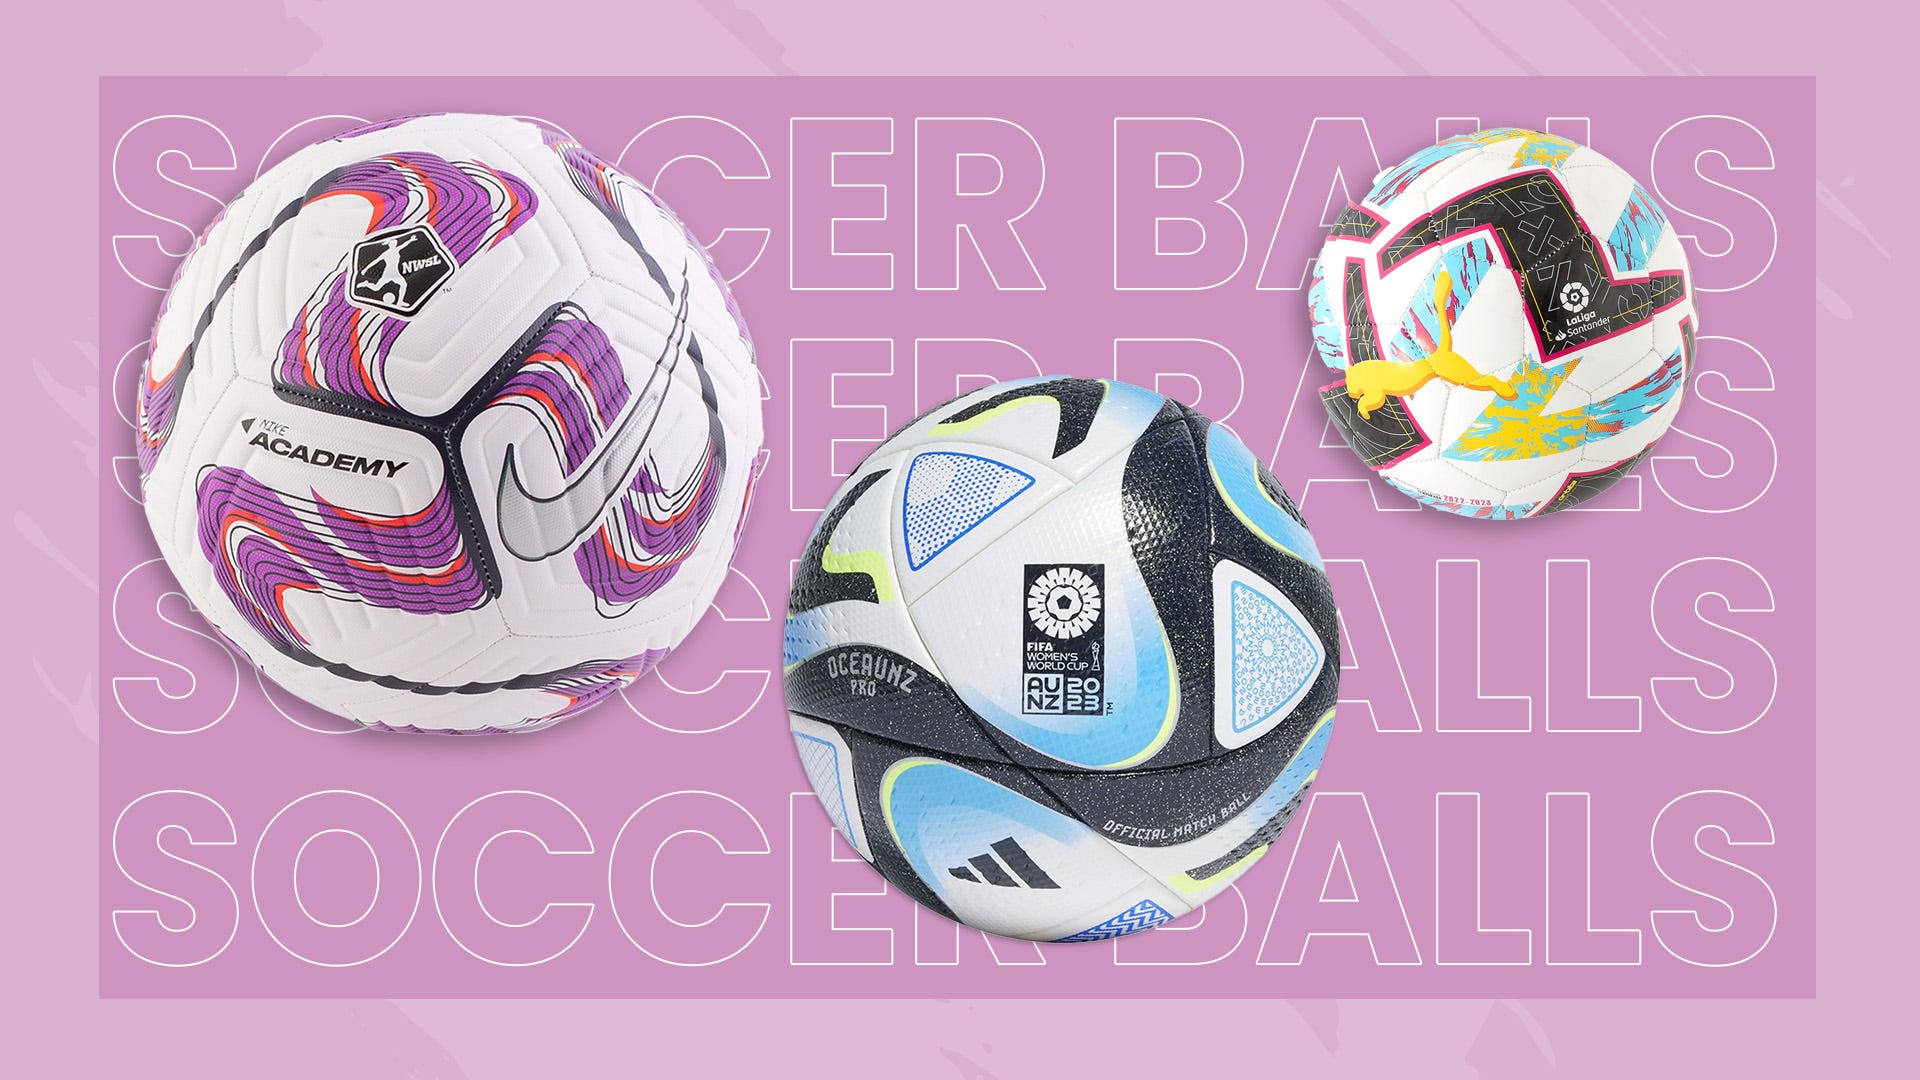 The 12 best soccer balls you can buy in 2023 | Goal.com US